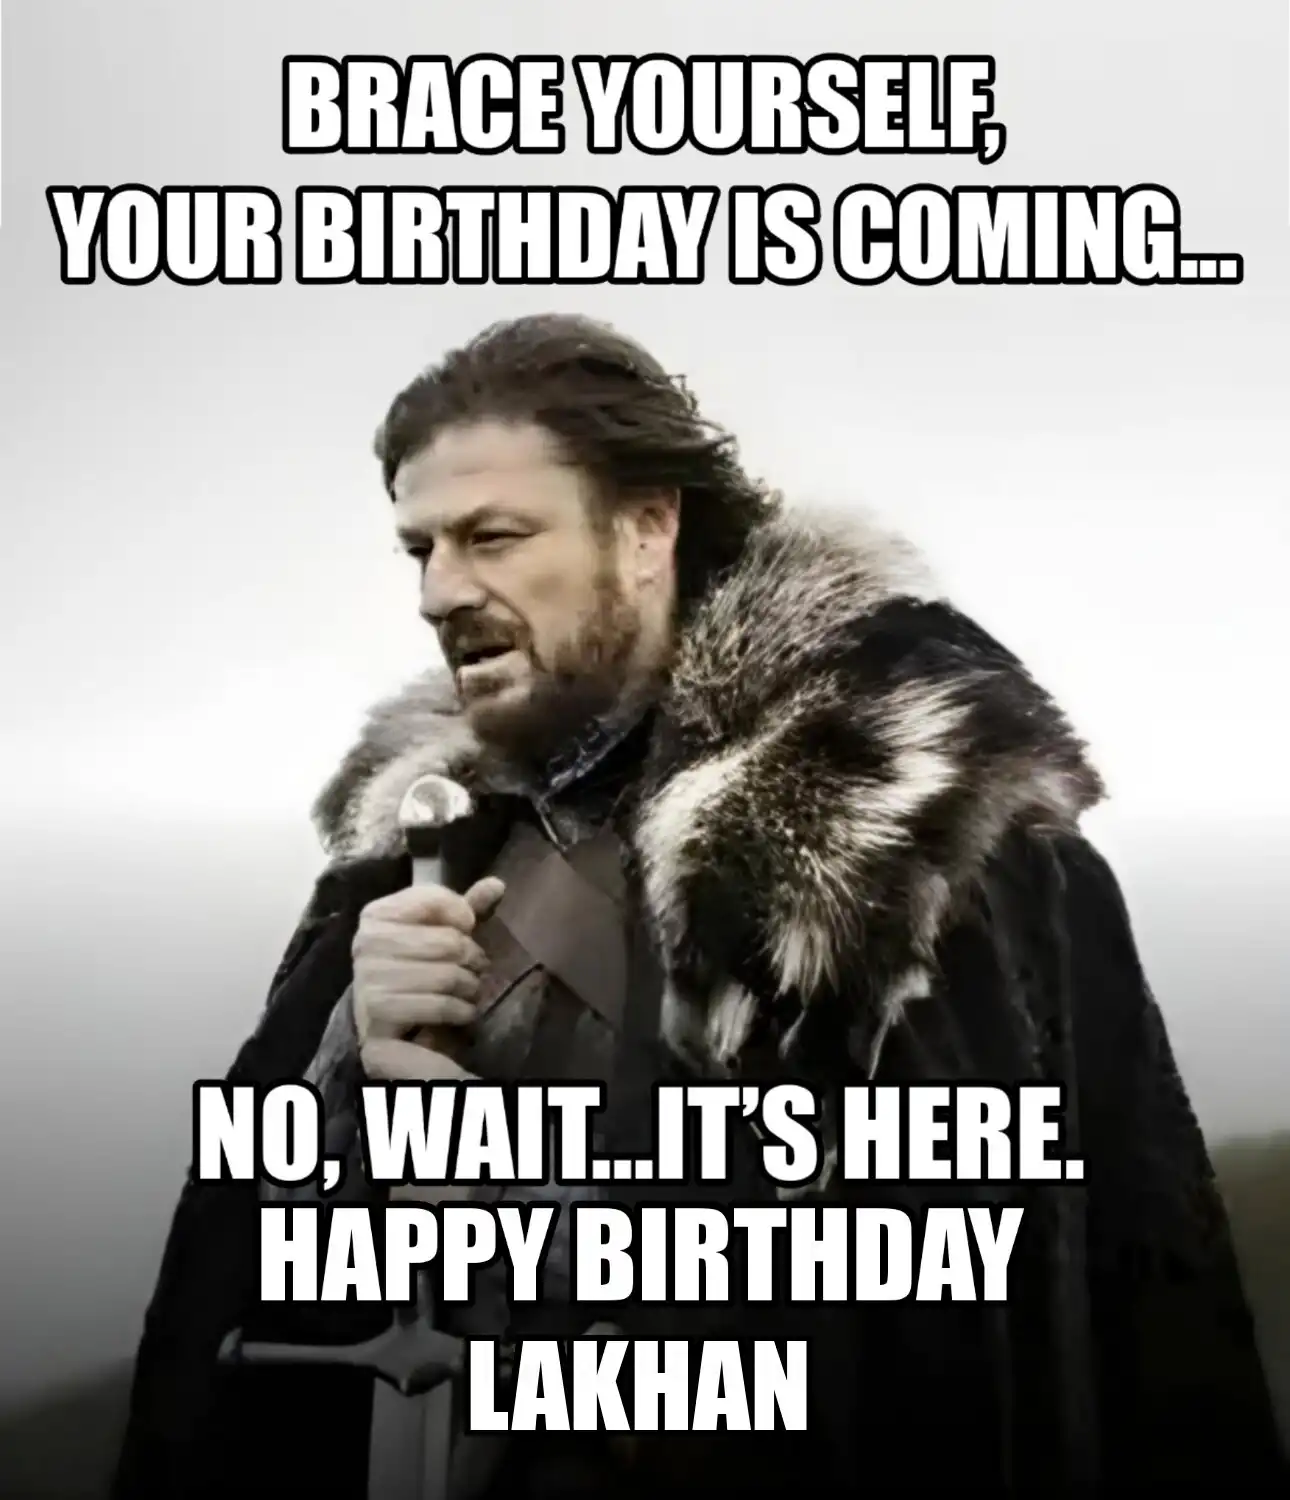 Happy Birthday Lakhan Brace Yourself Your Birthday Is Coming Meme